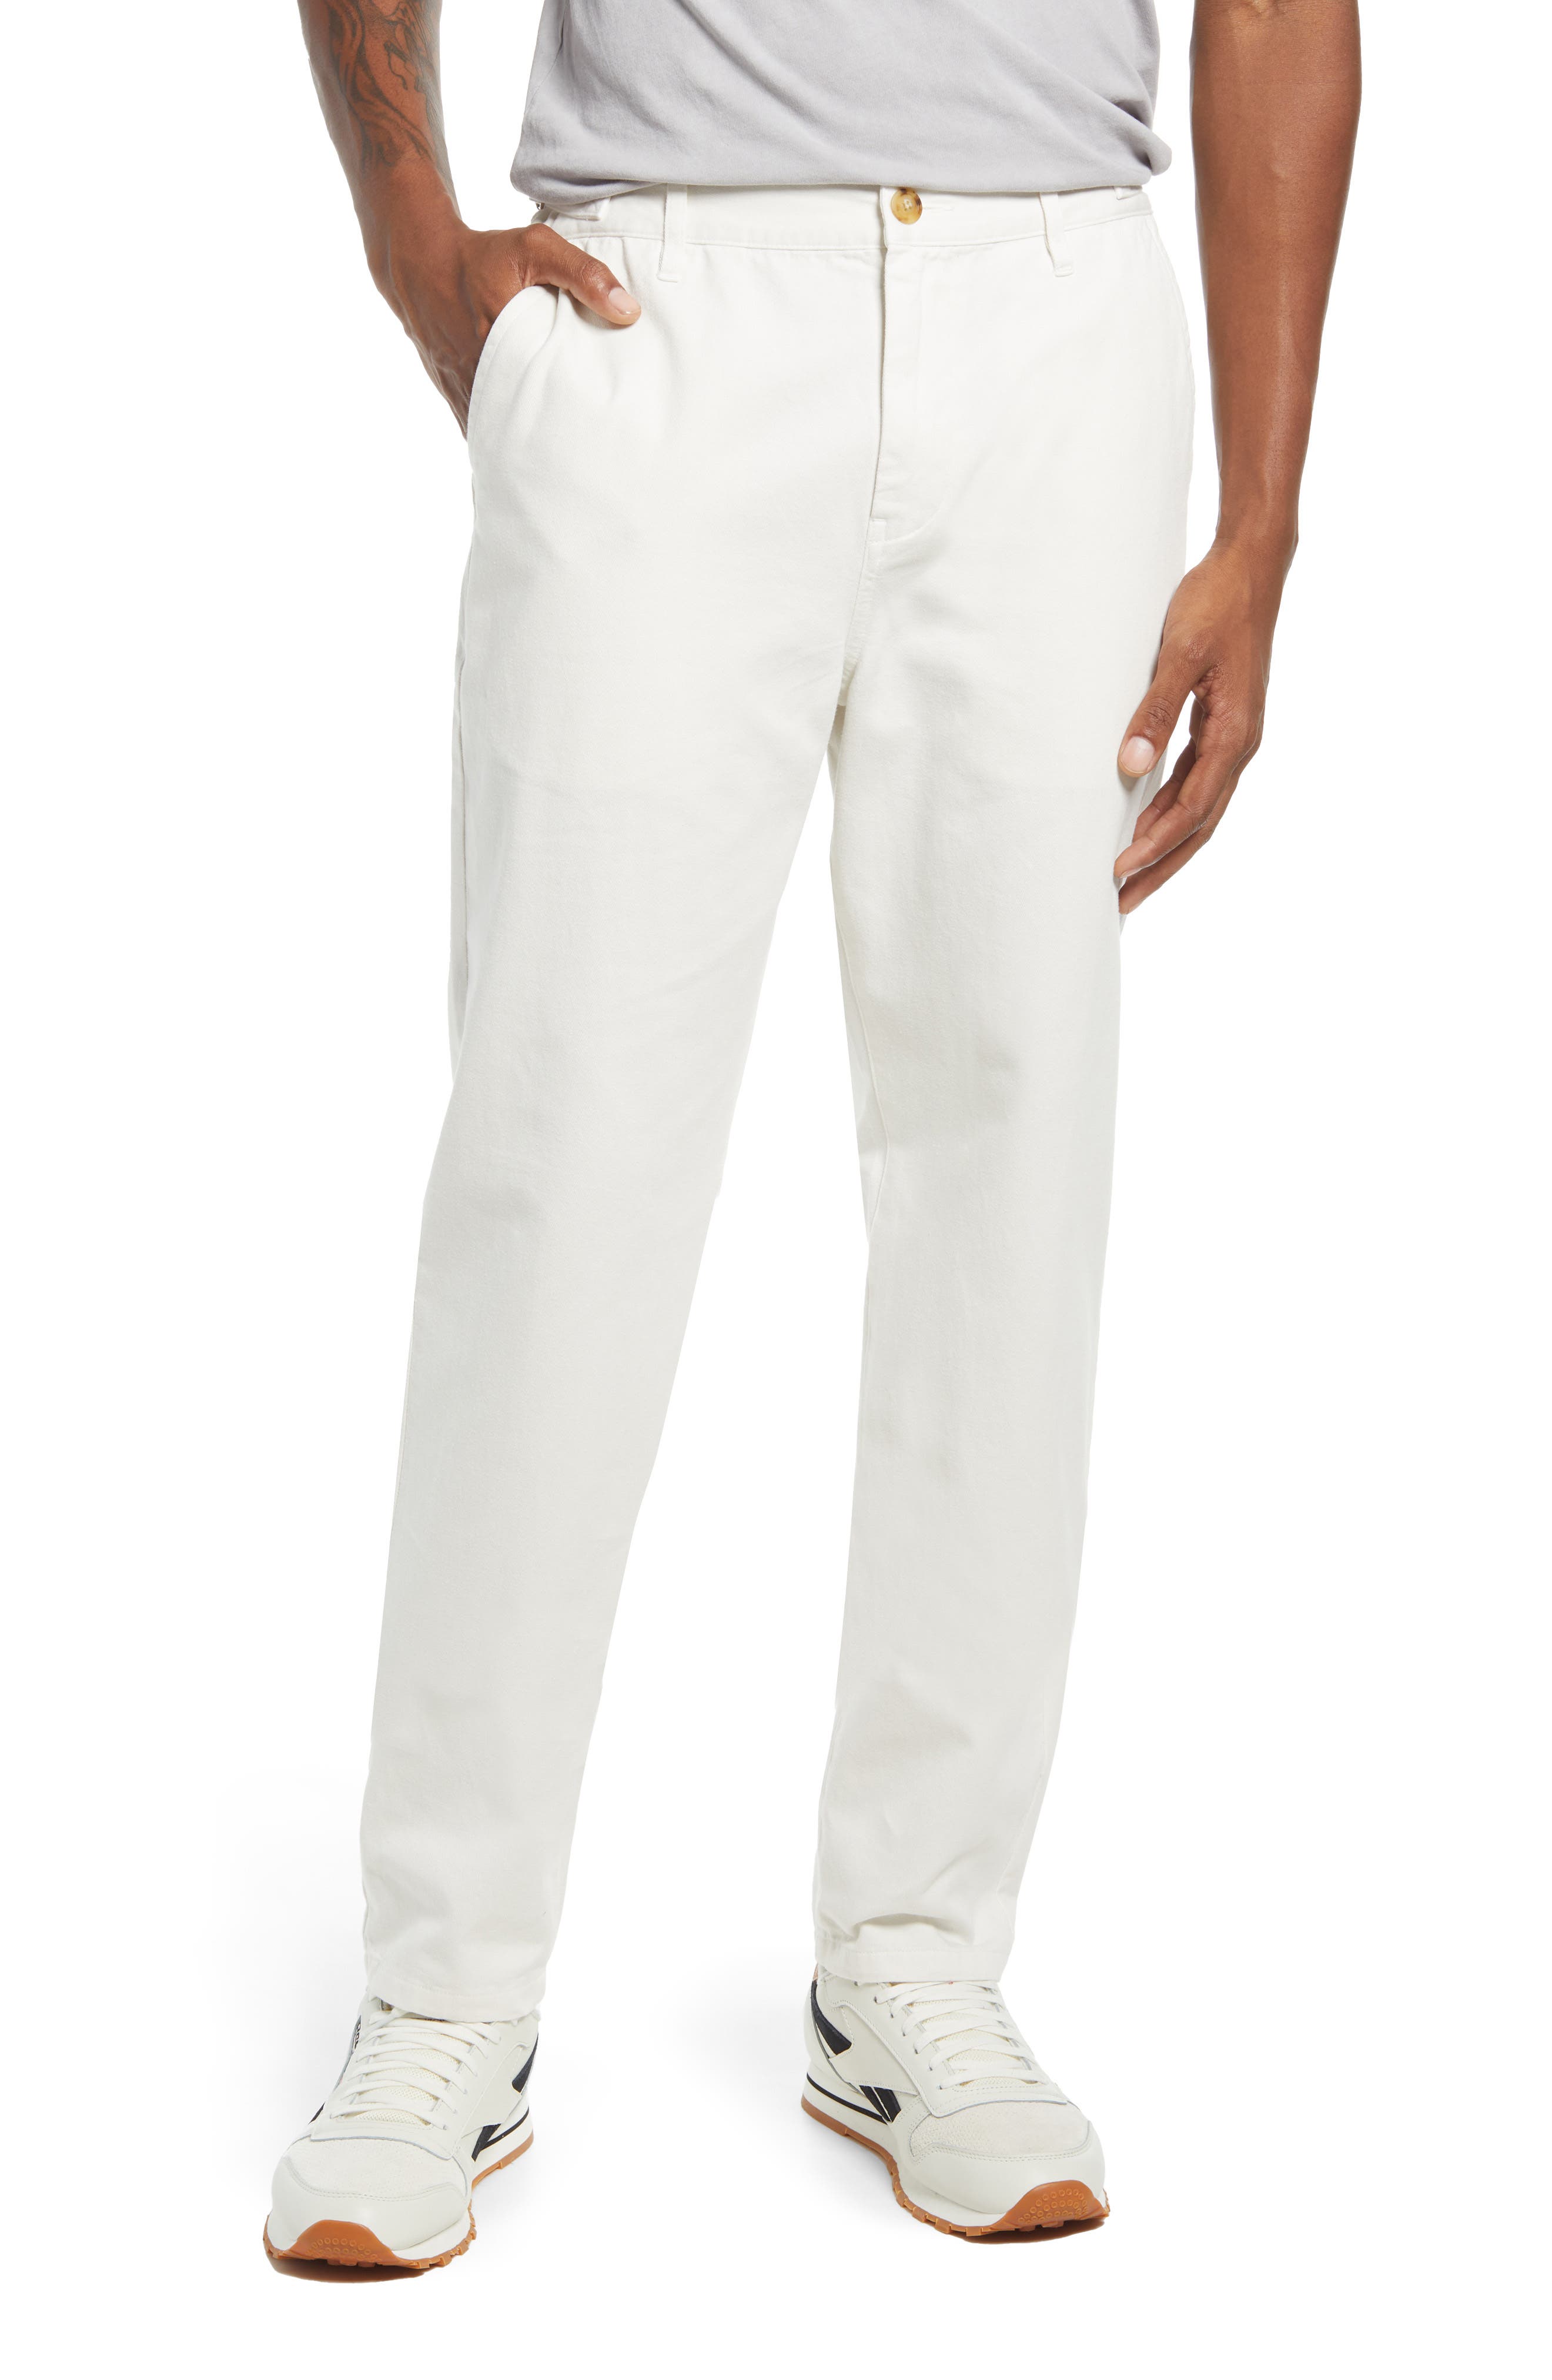 John Elliott Canyon Work Chinos in Chalk at Nordstrom, Size Xx-Large